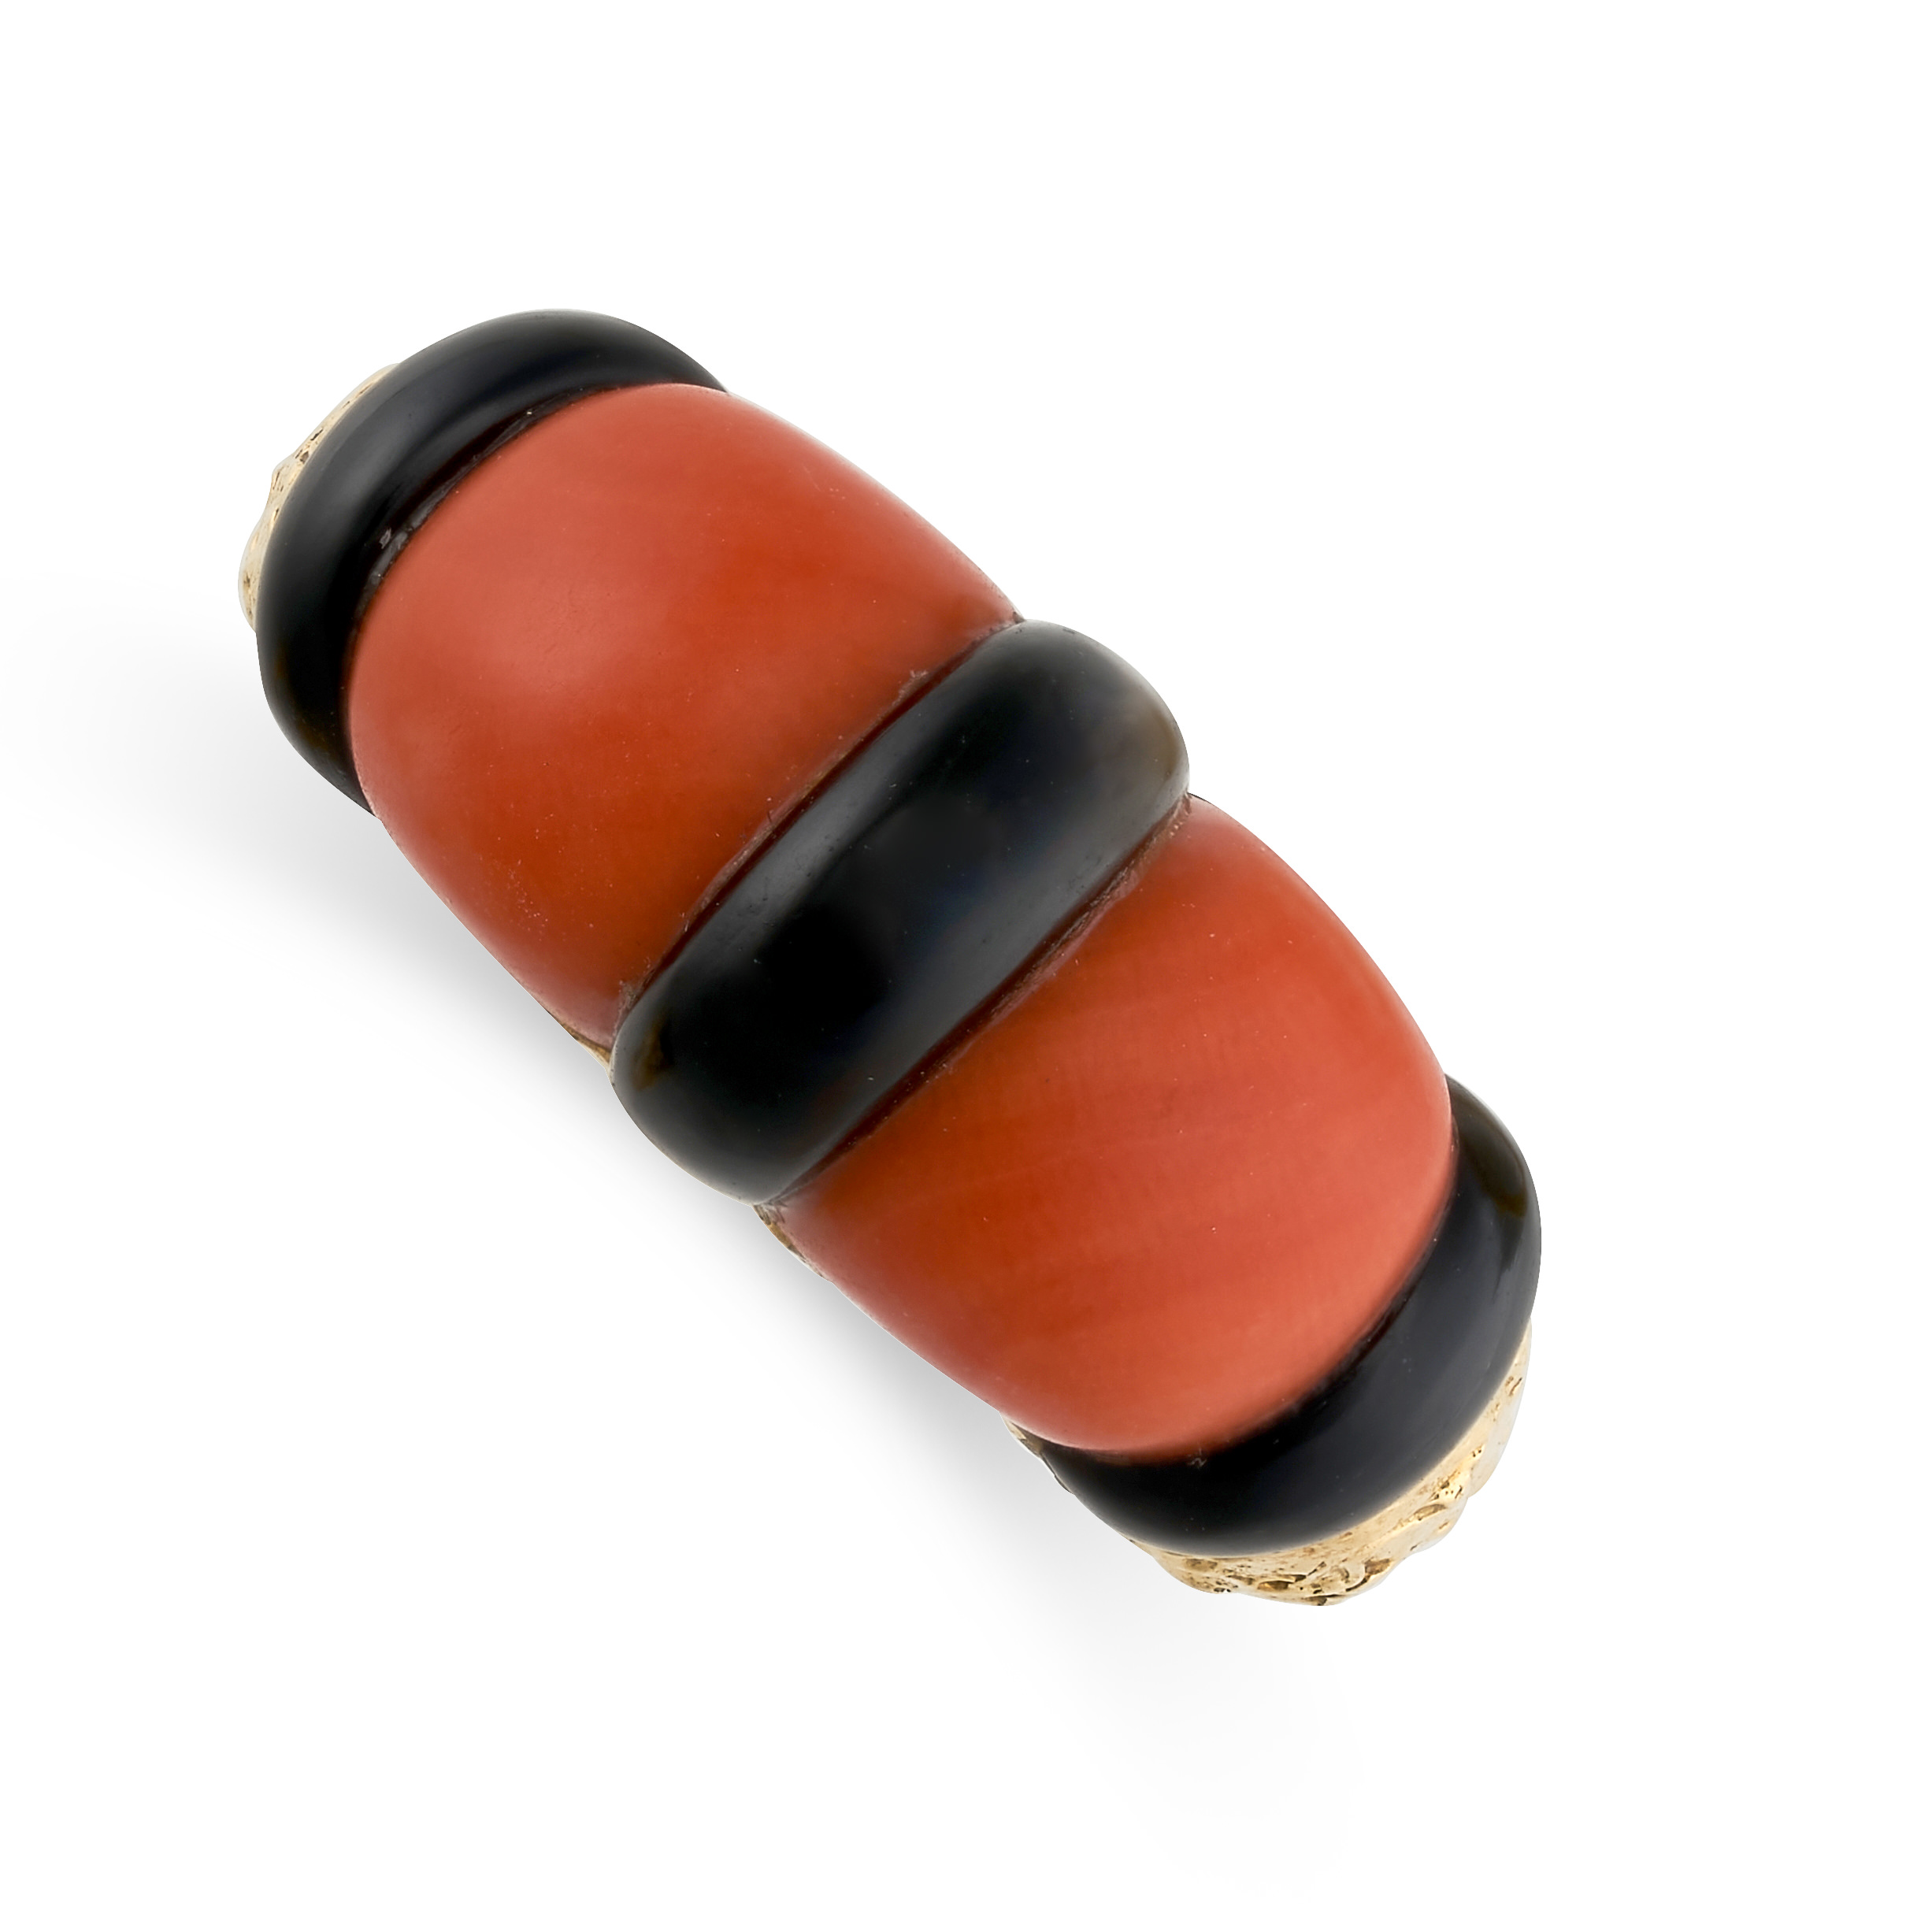 PIAGET, A CORAL AND ONYX RING in 18ct yellow gold, set with alternating pieces of polished coral and